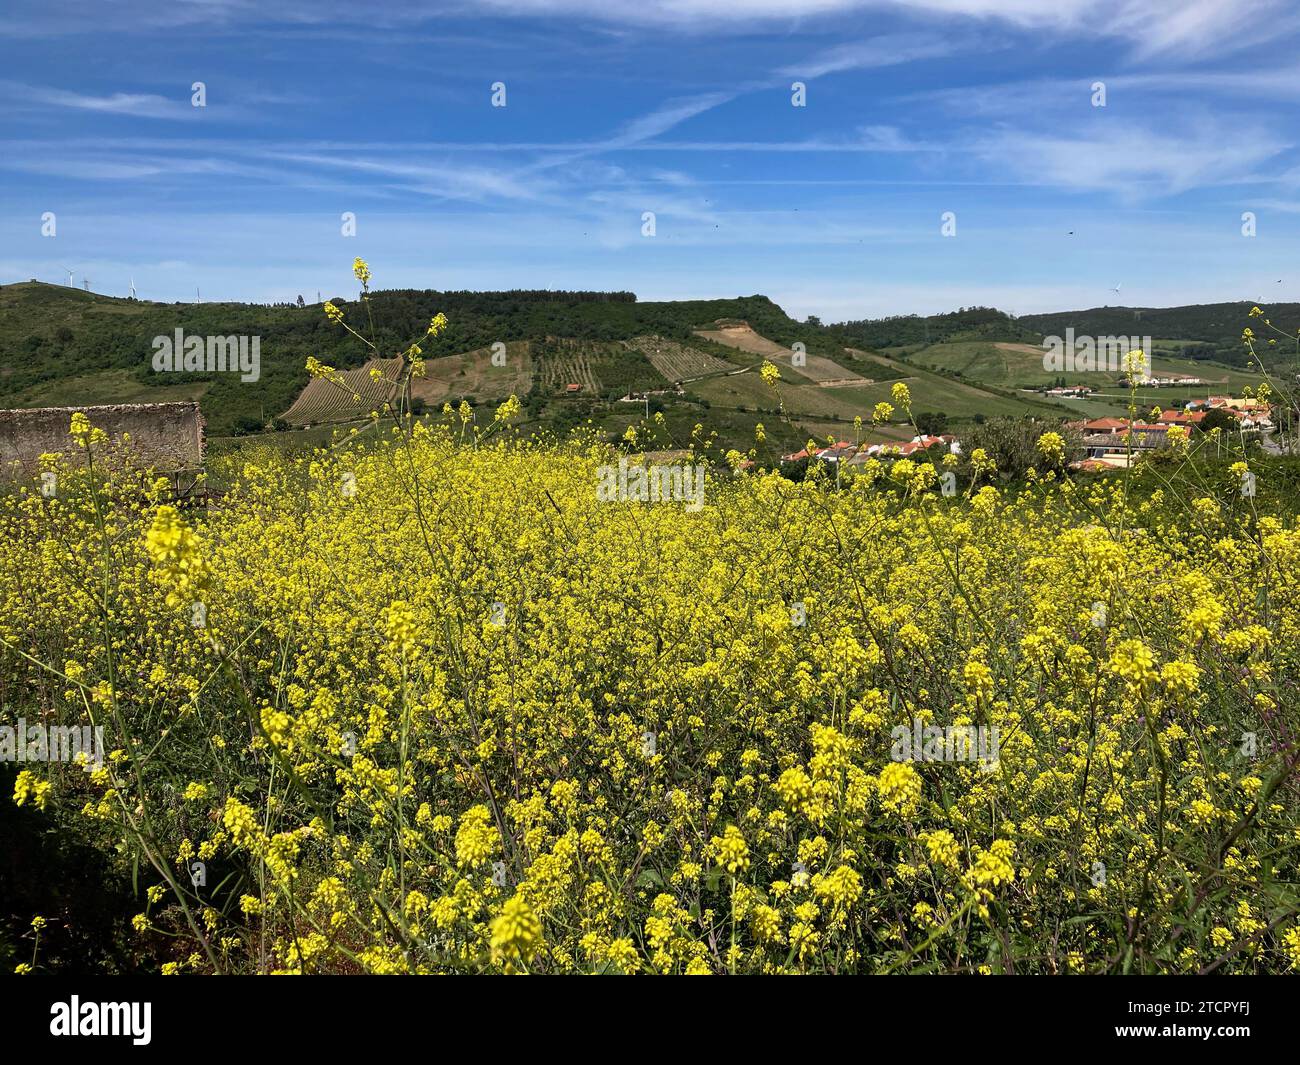 A scenic rural landscape featuring a vibrant yellow field of blooming Canola flowers. Stock Photo